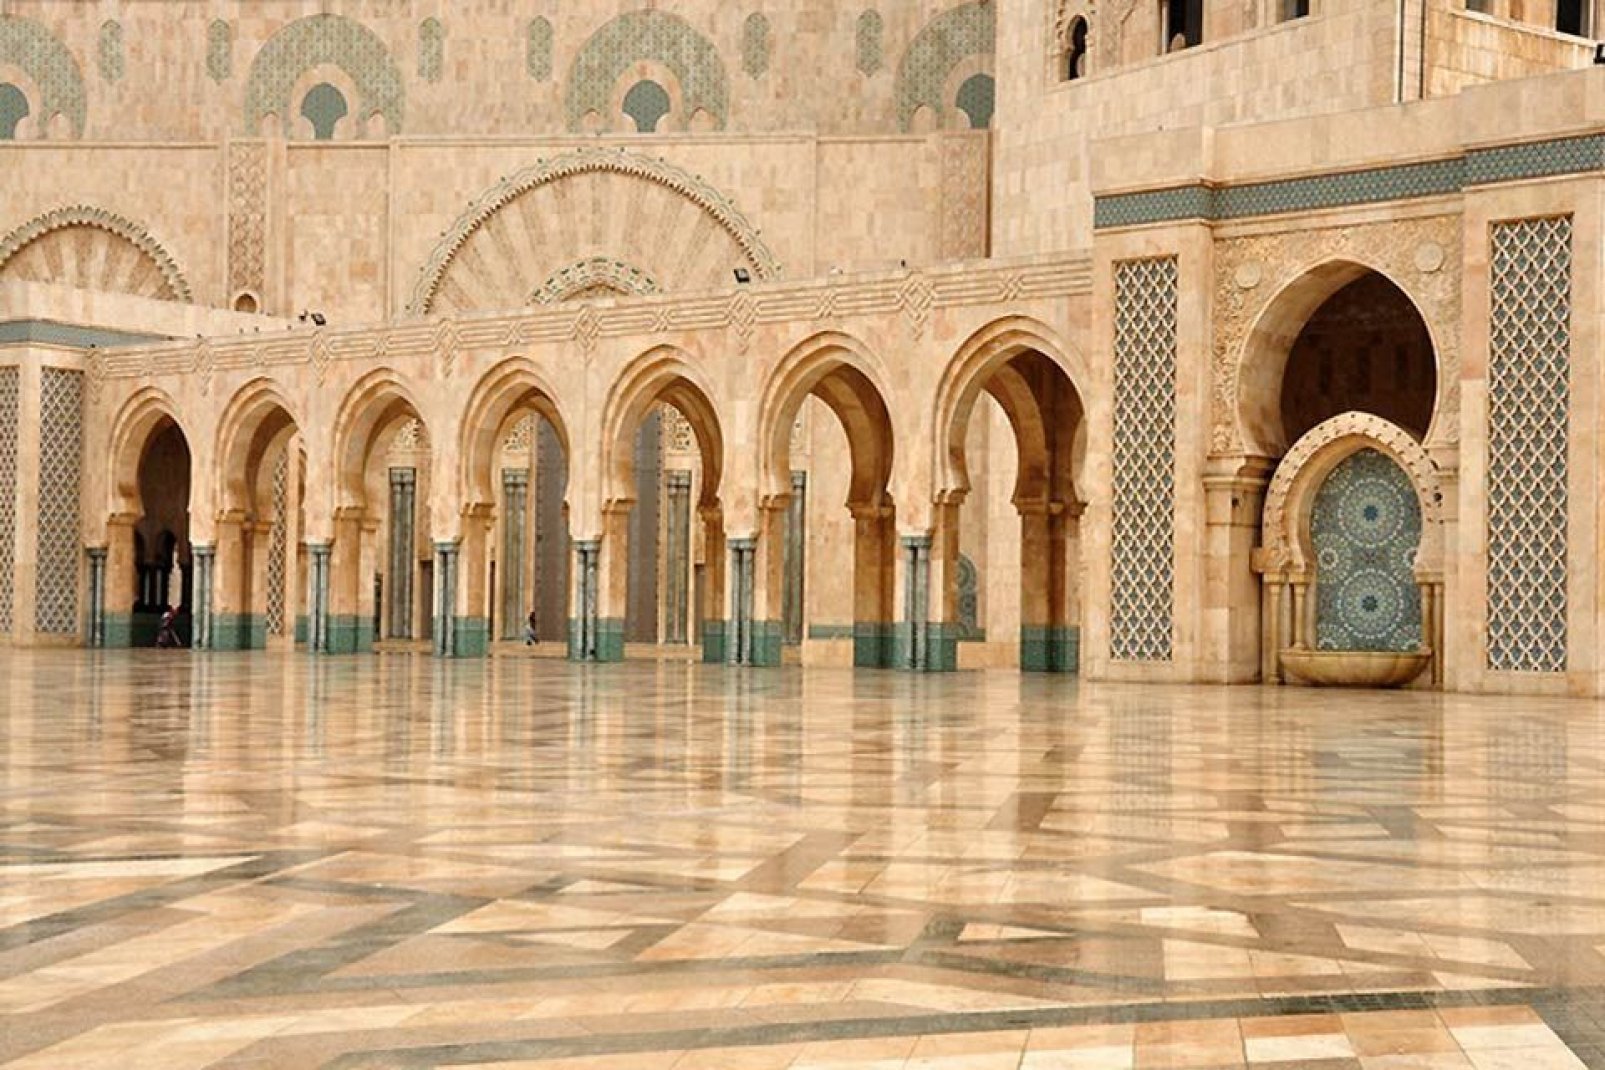 The interior of the mosque,decorated with finesse